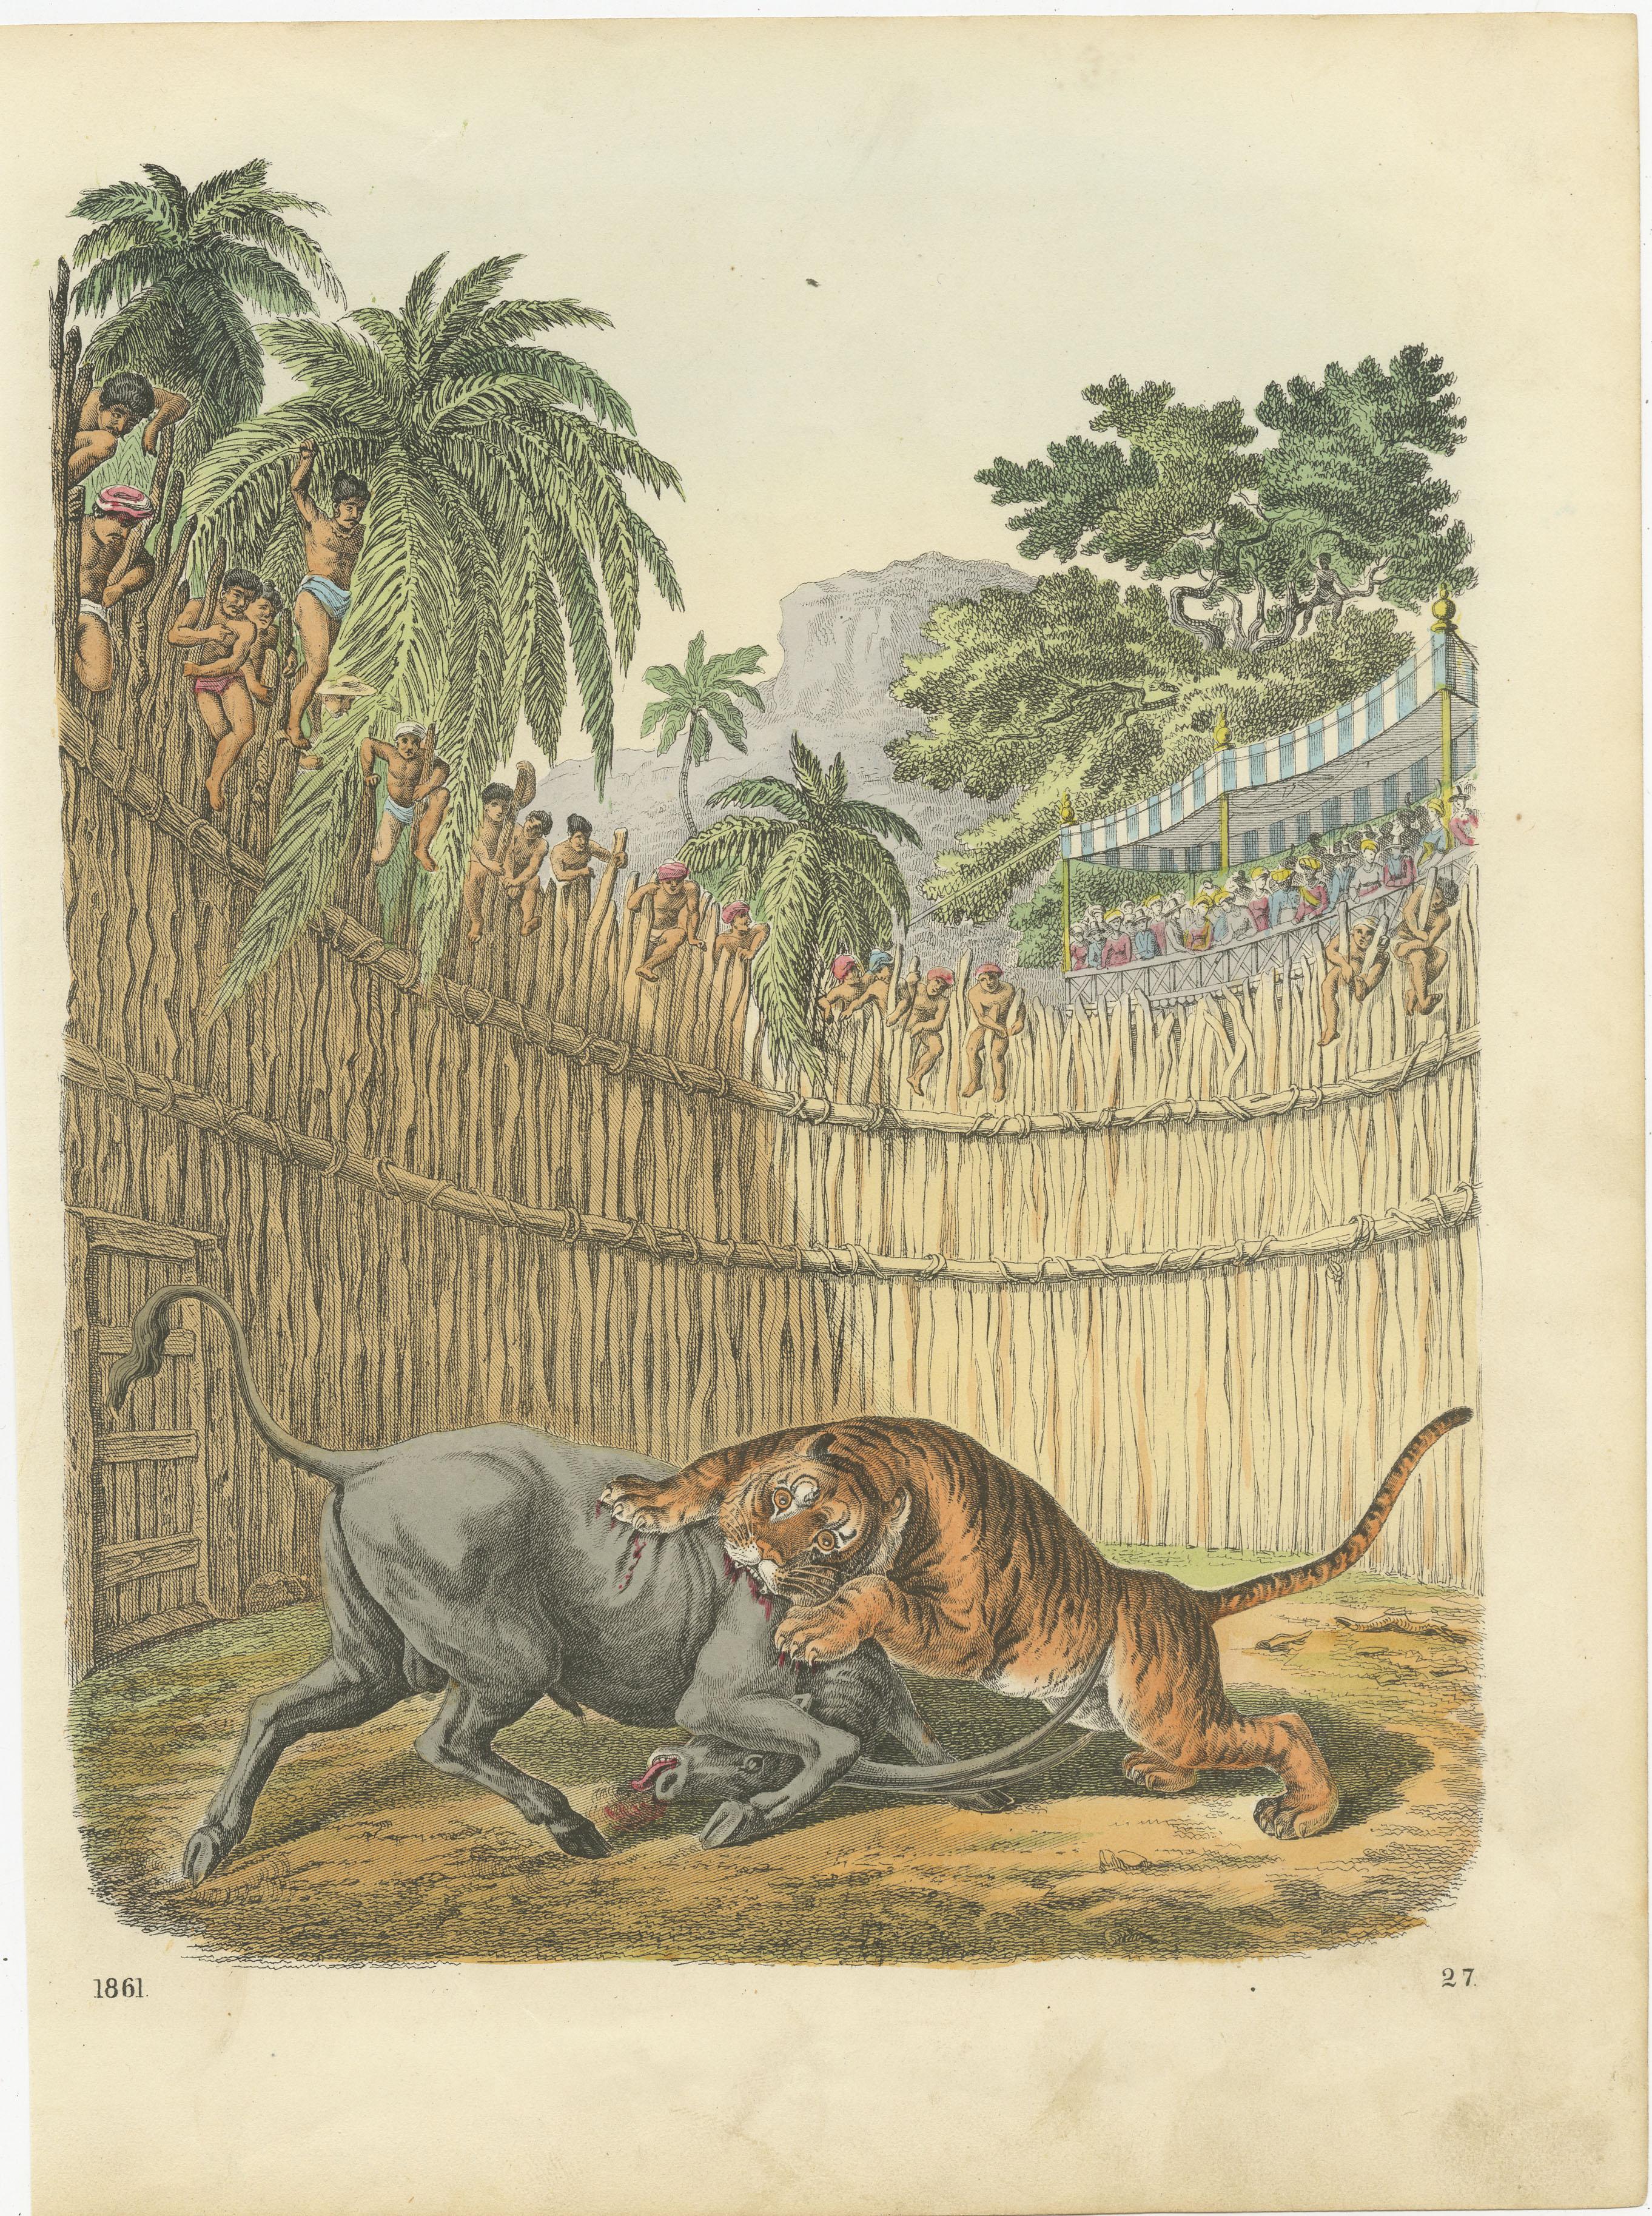 Original antique lithograph of a fight between a tiger and an antelope. Published circa 1861.